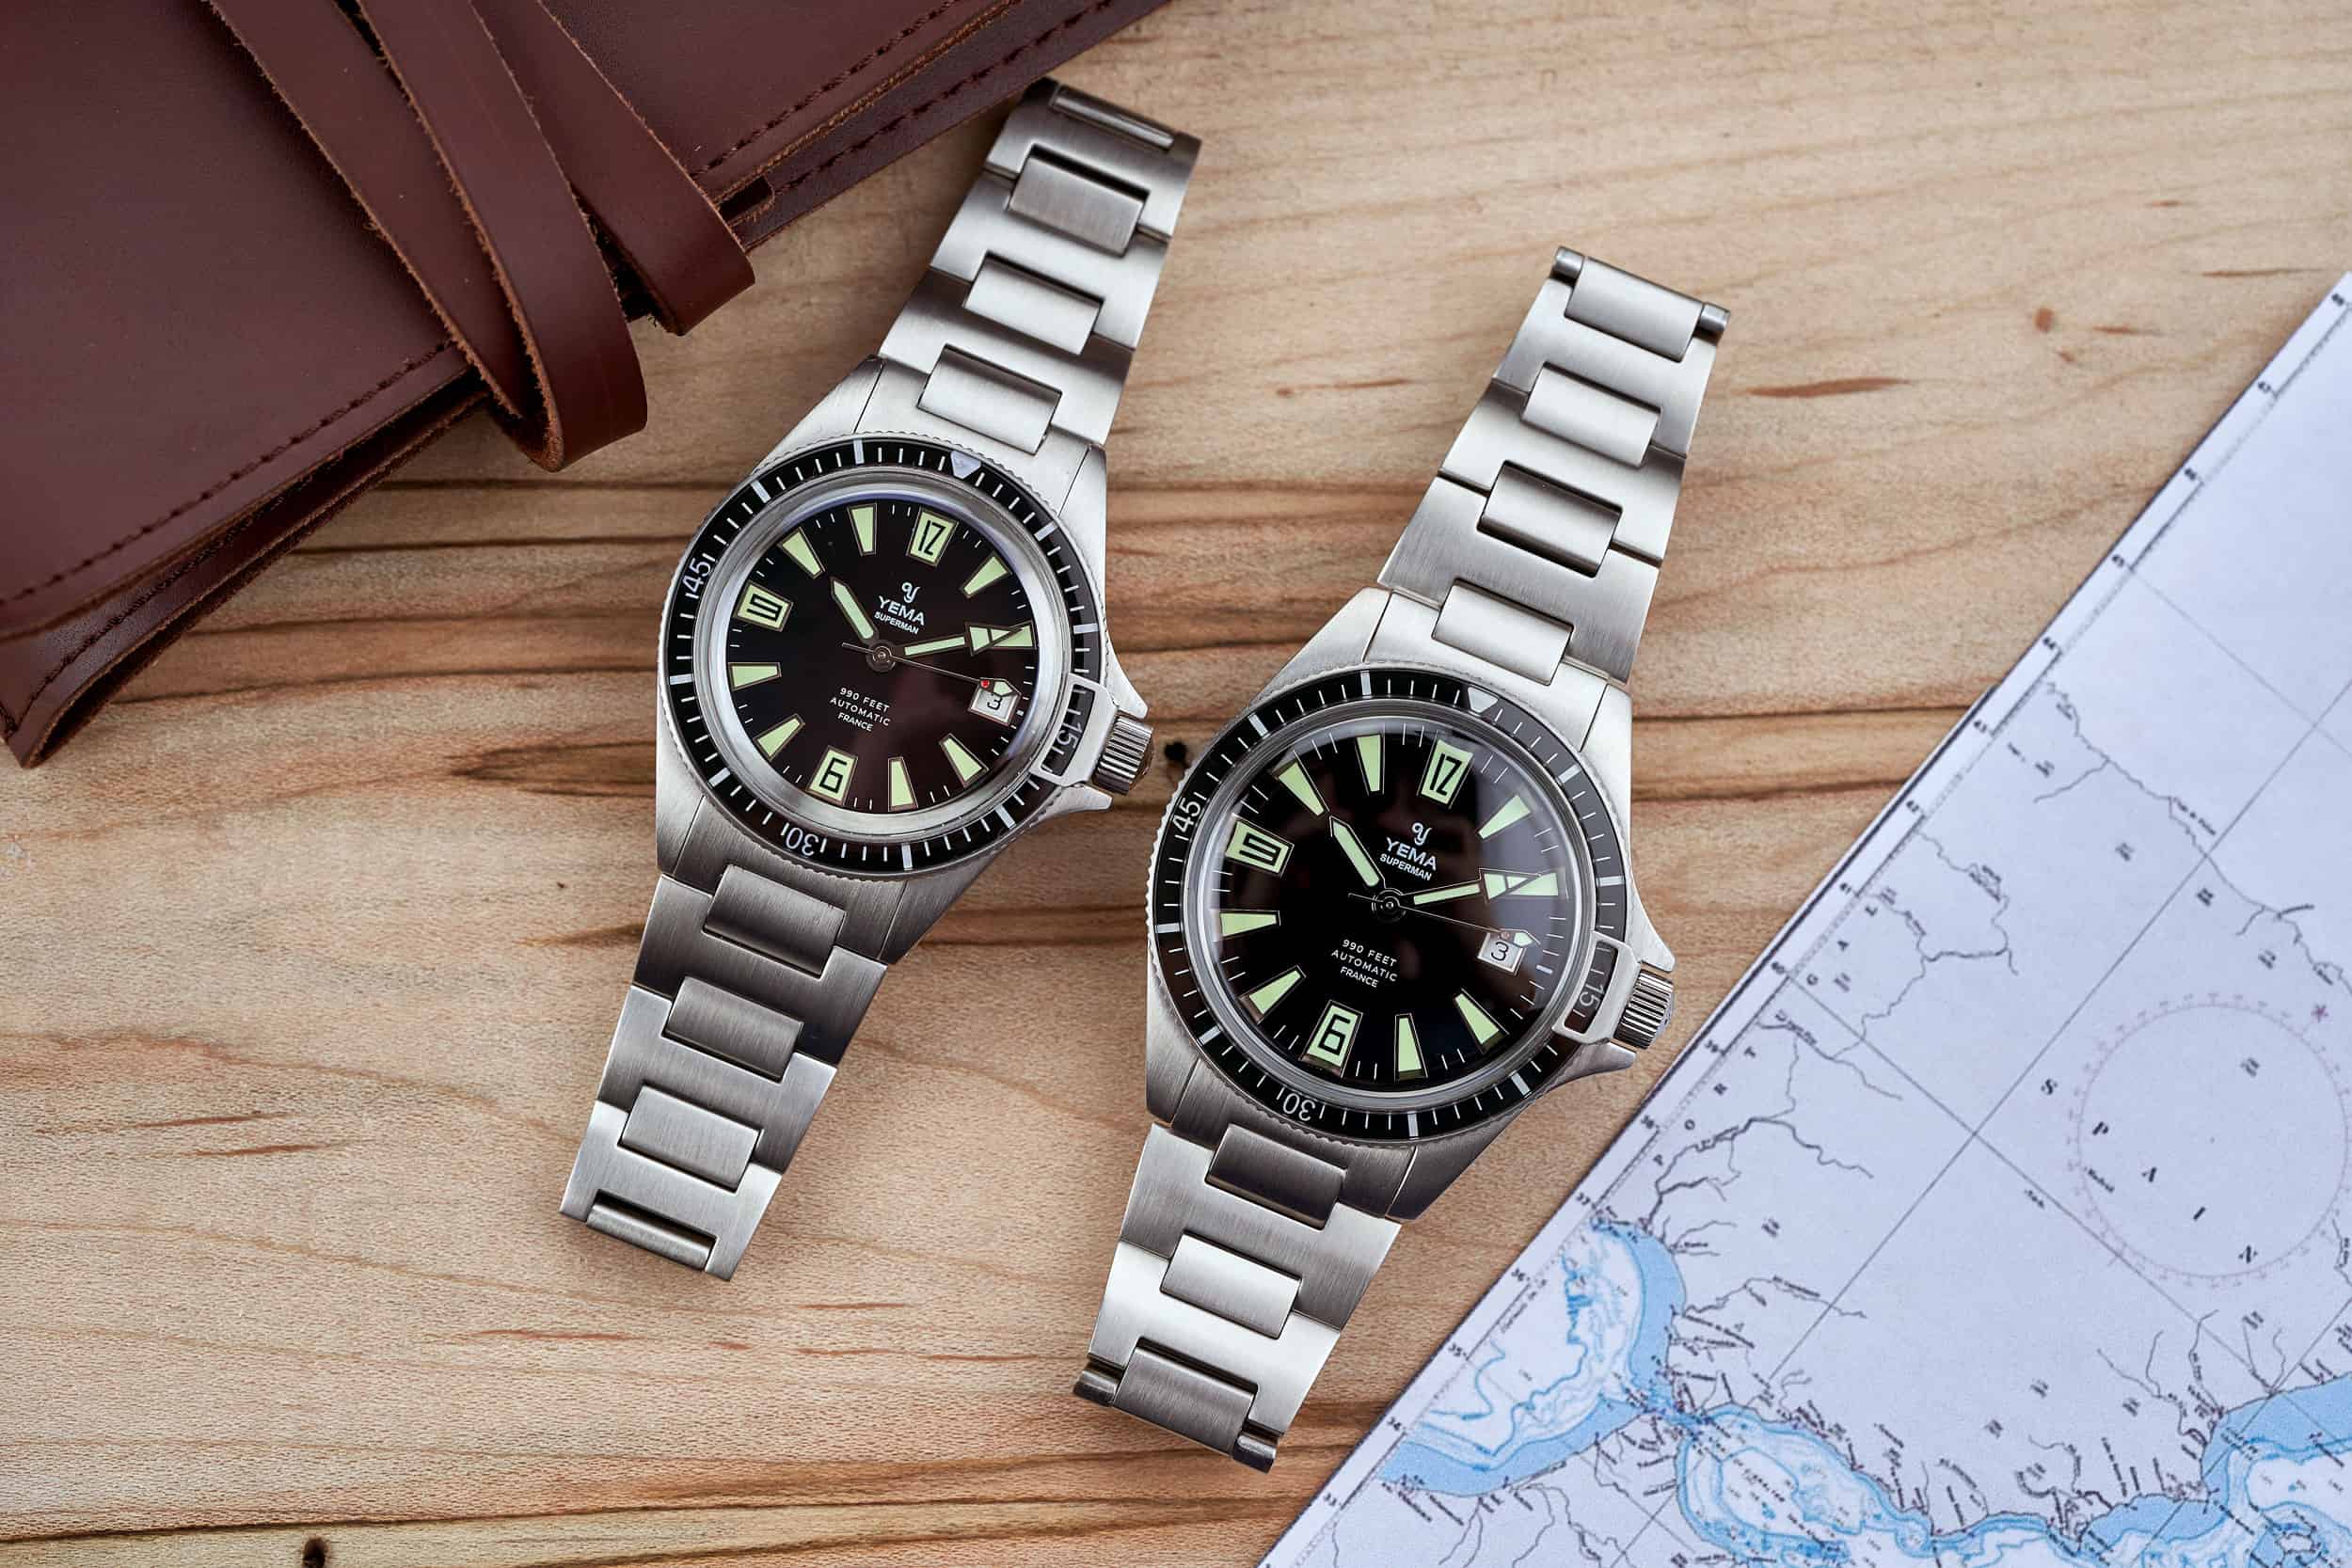 New Yema Watches for the Sky and Sea – Available Now at the Windup Watch Shop